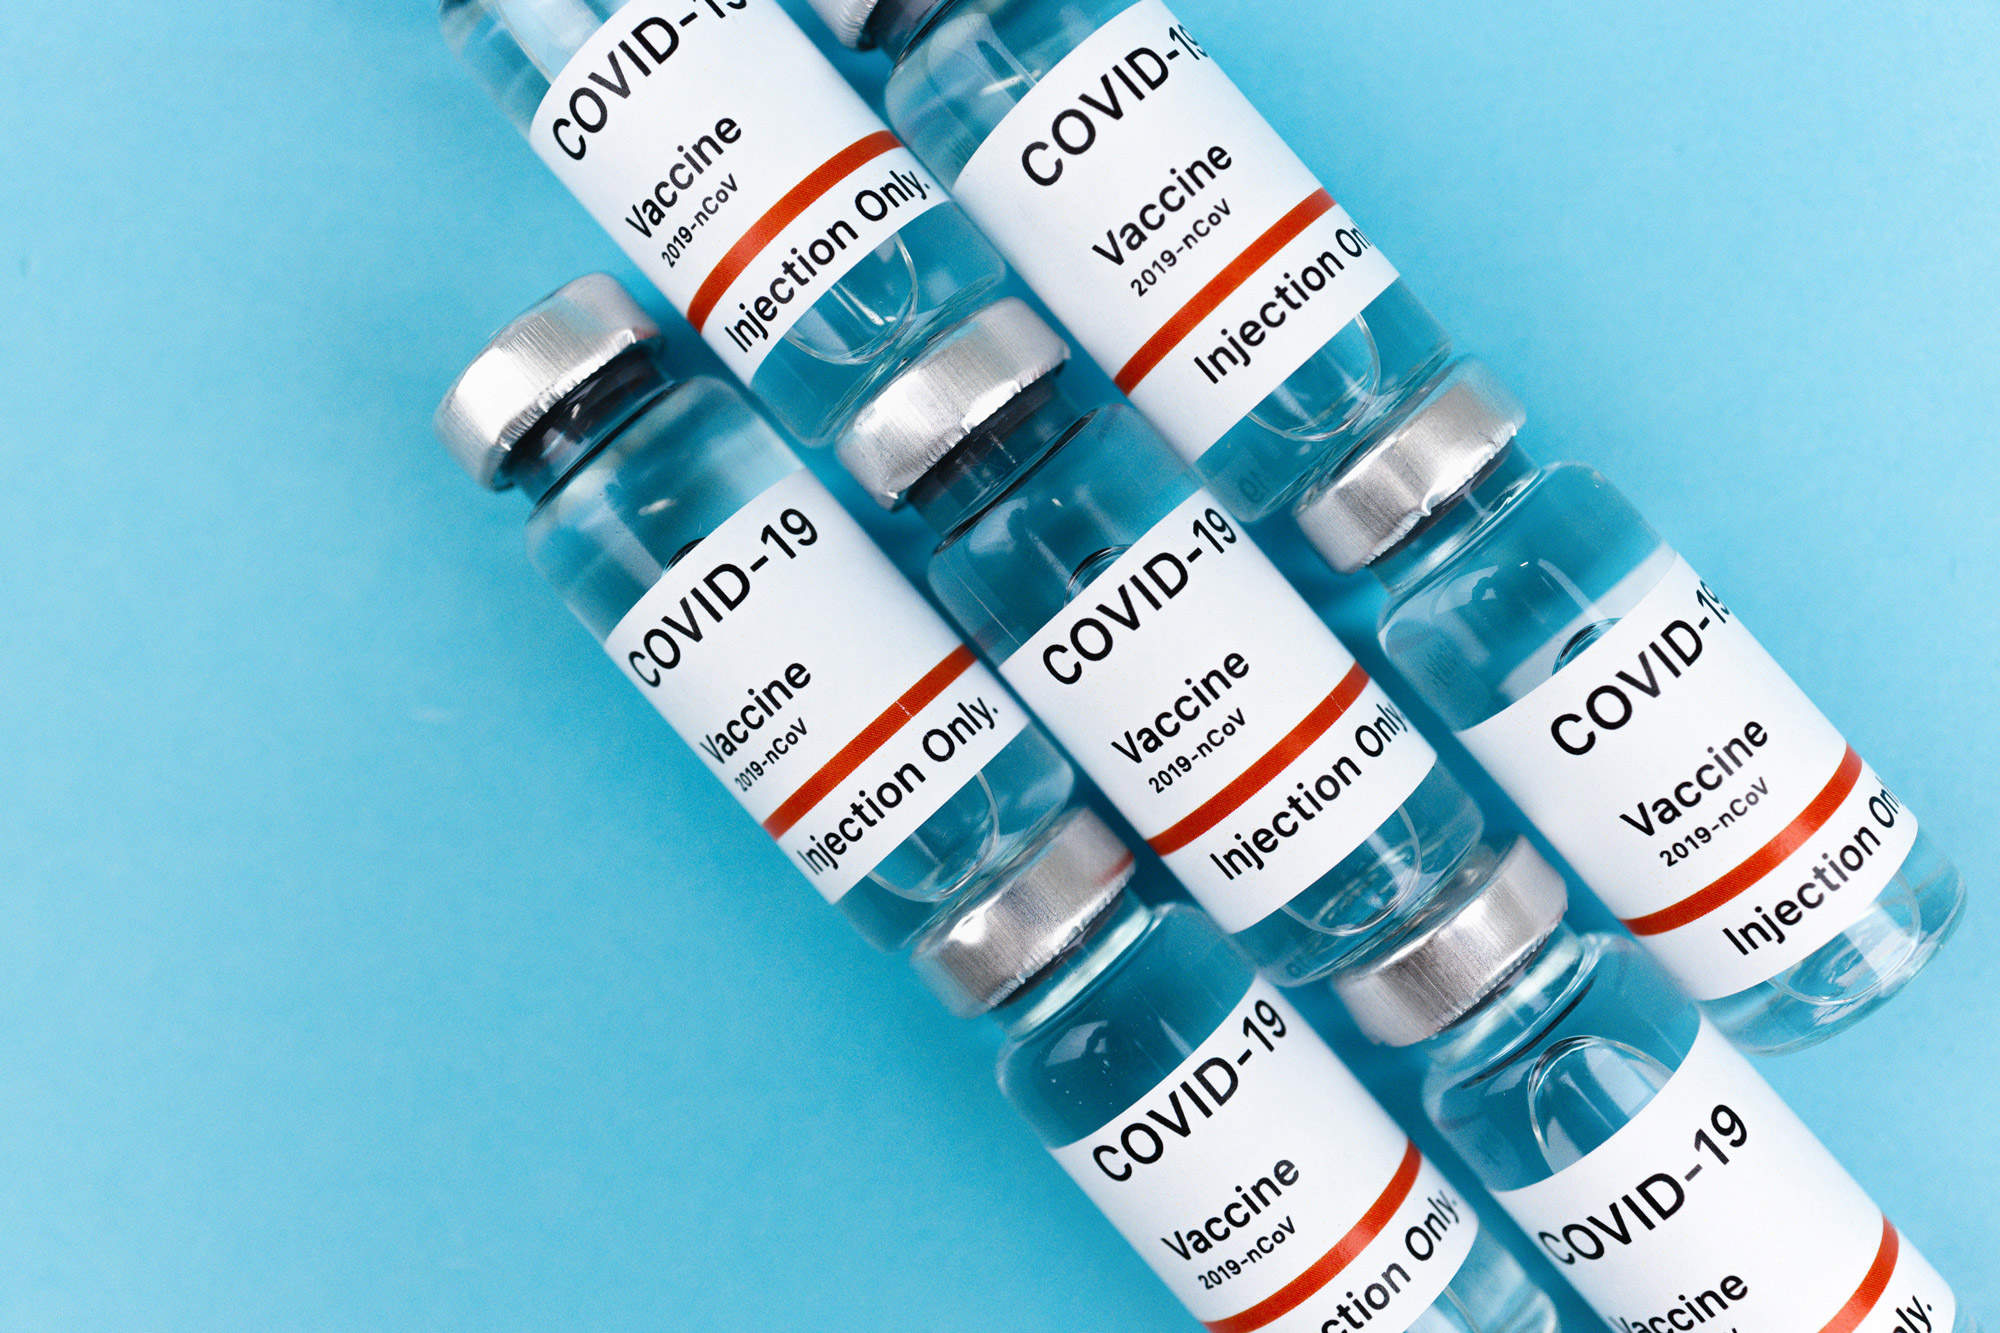 Information on COVID-19 vaccination for Parkinson’s disease patients